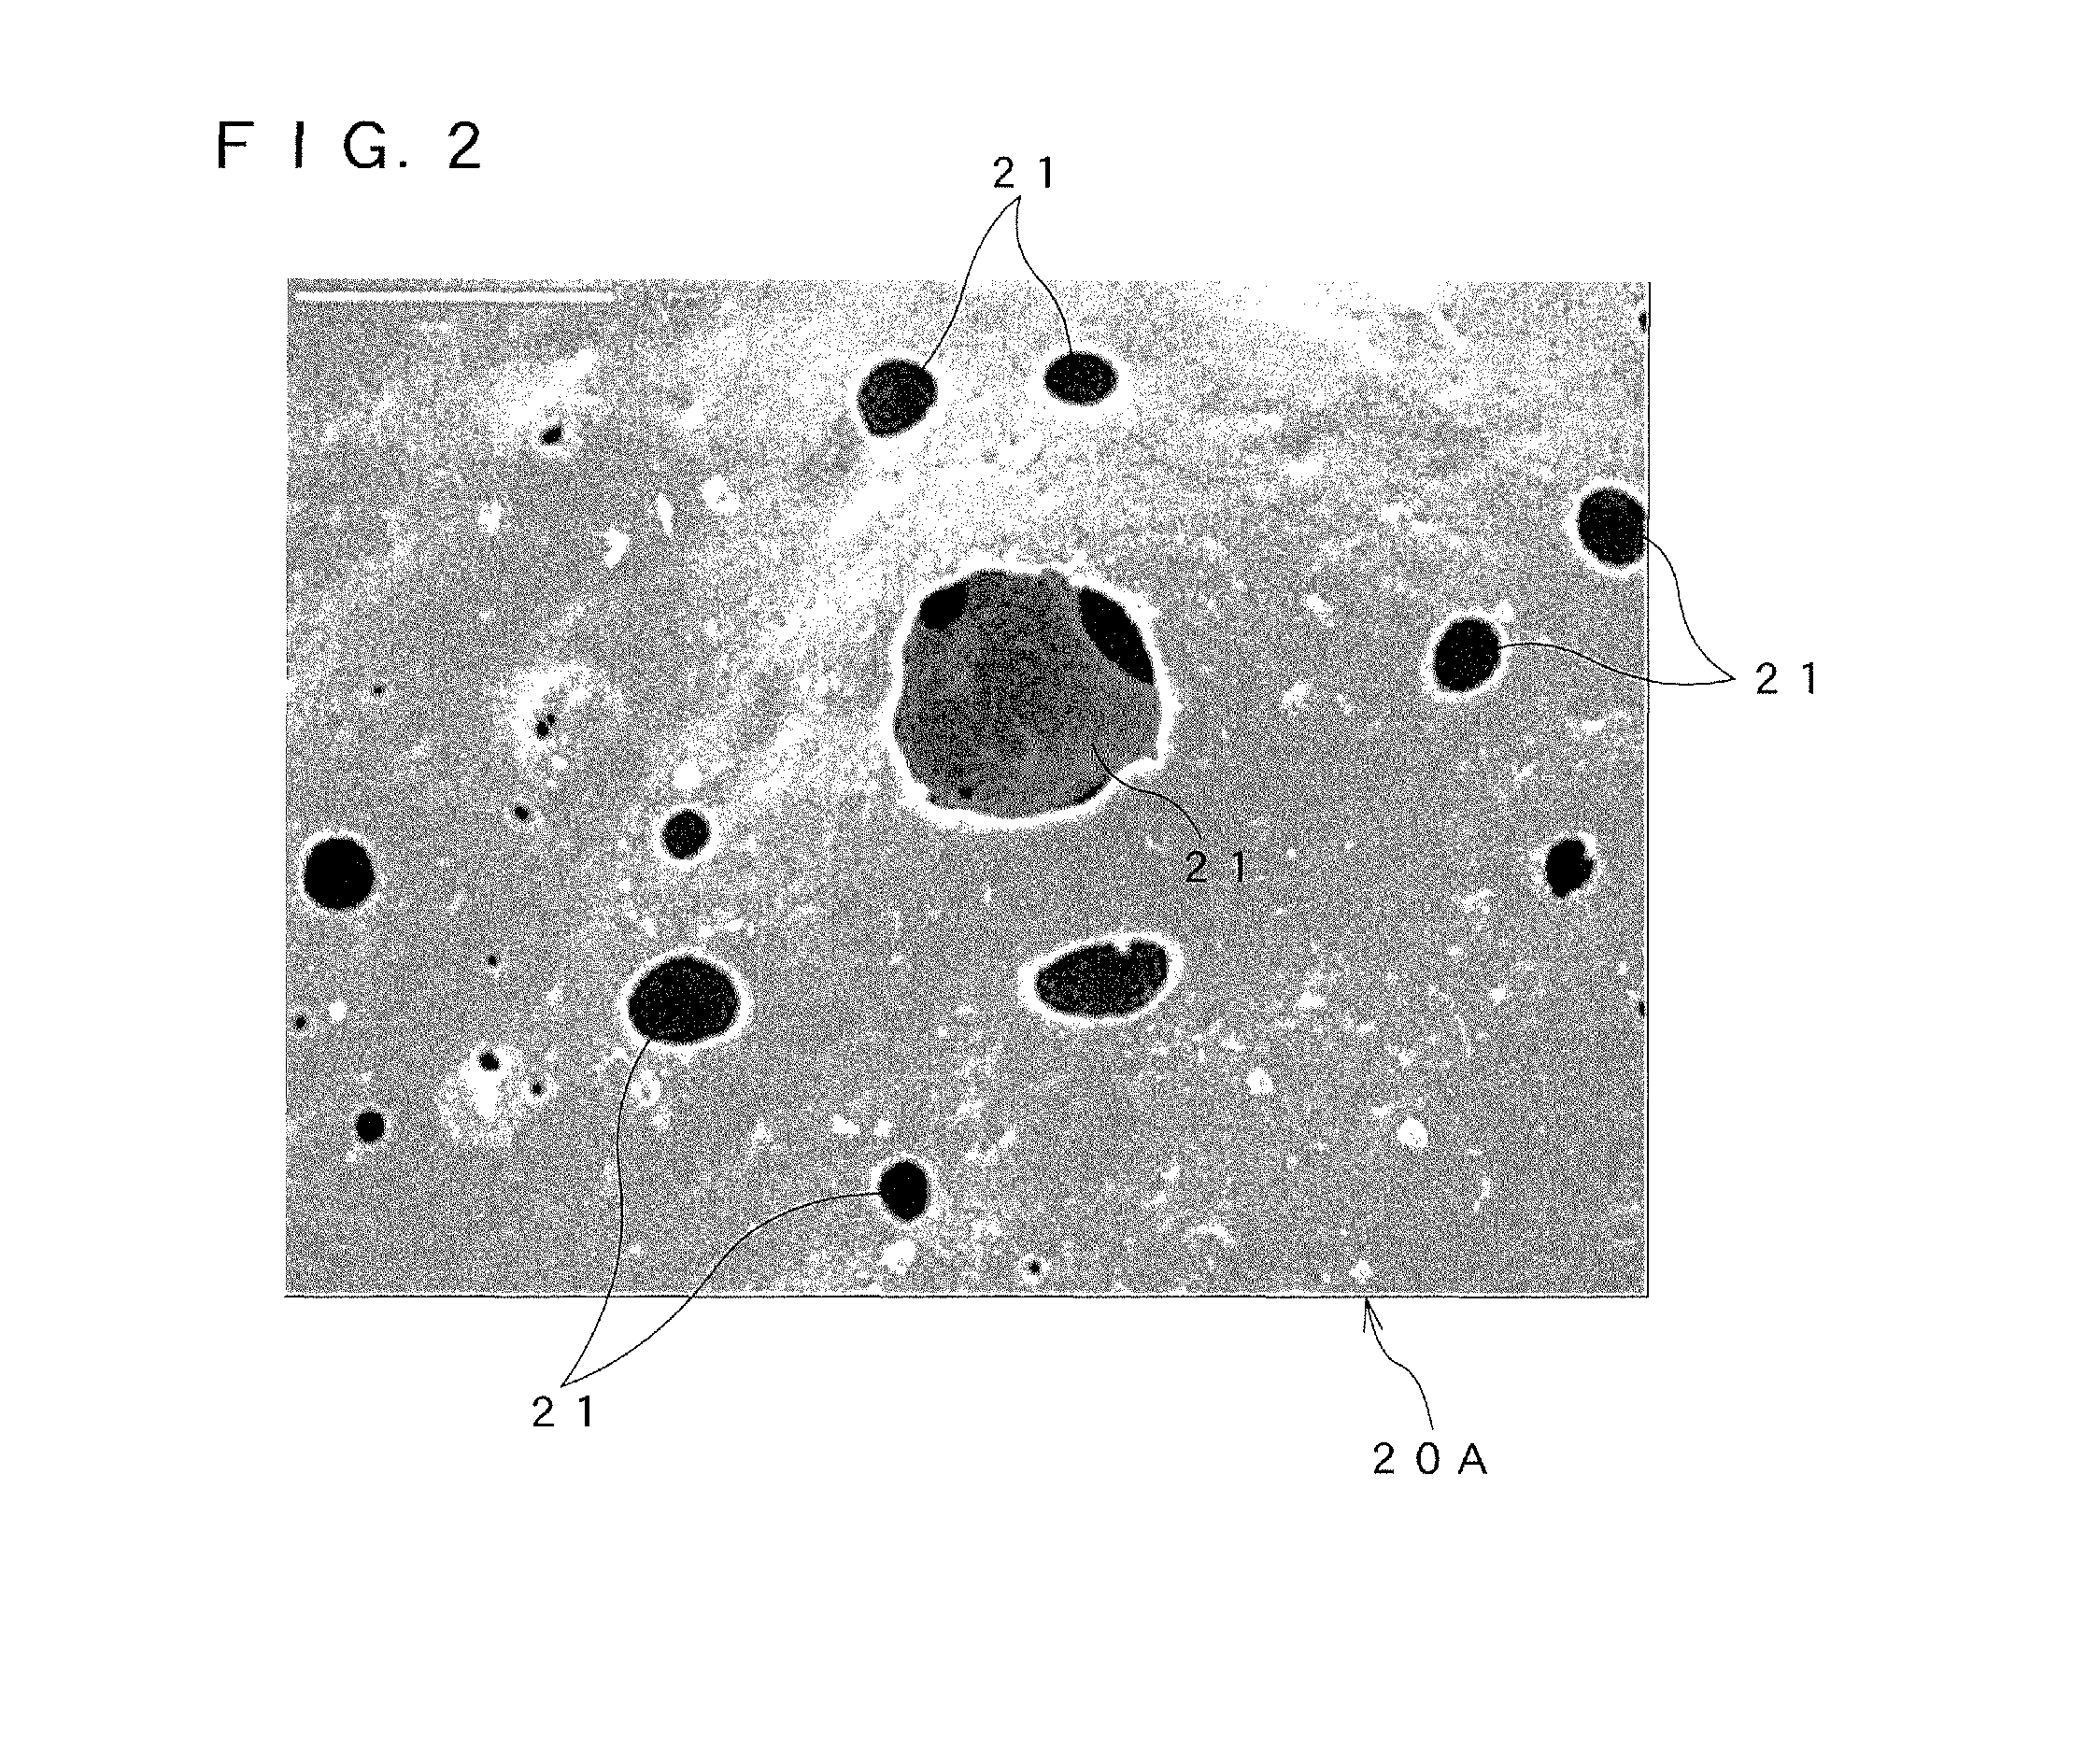 Structure having sound absorption characteristic